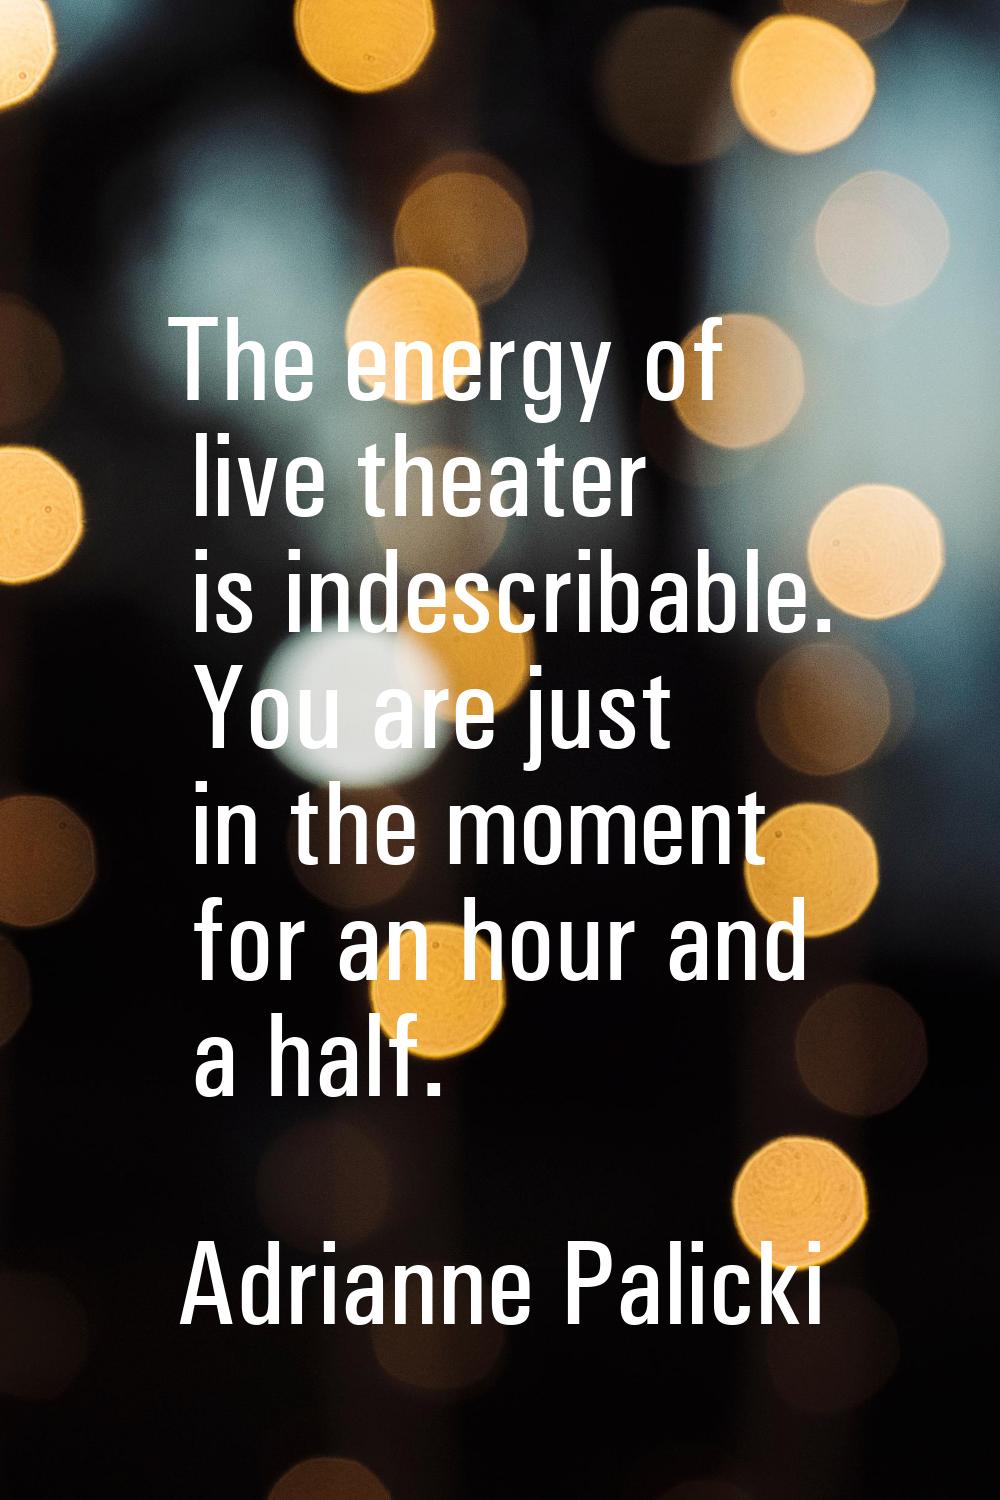 The energy of live theater is indescribable. You are just in the moment for an hour and a half.